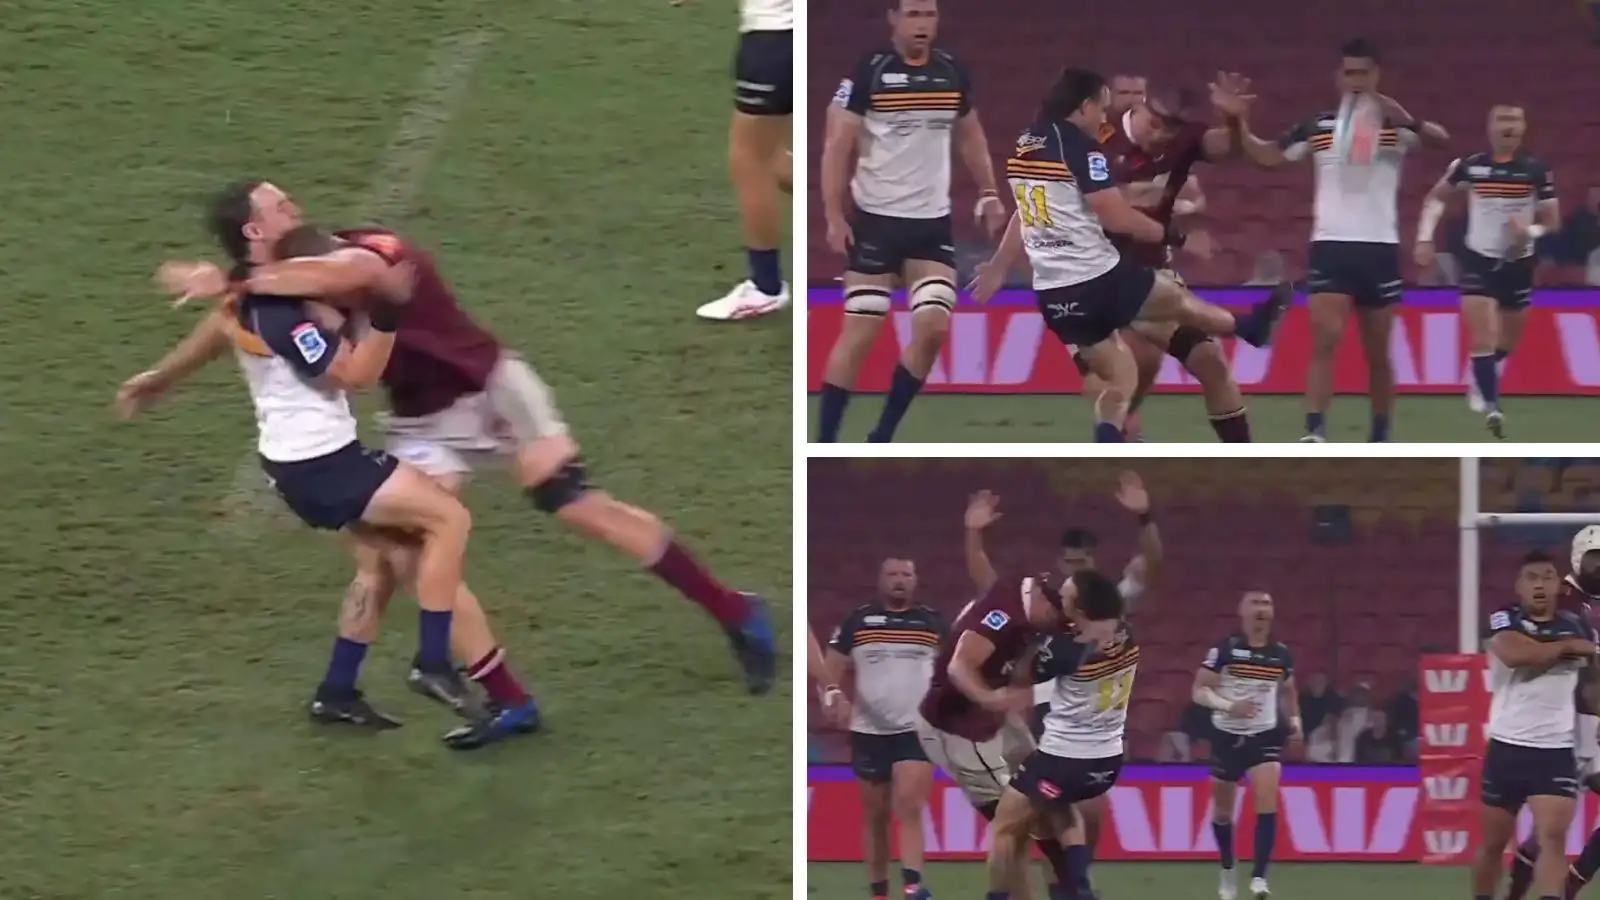 WATCH: Lock sent off after 'cheap shot' dubbed 'stupidest way to